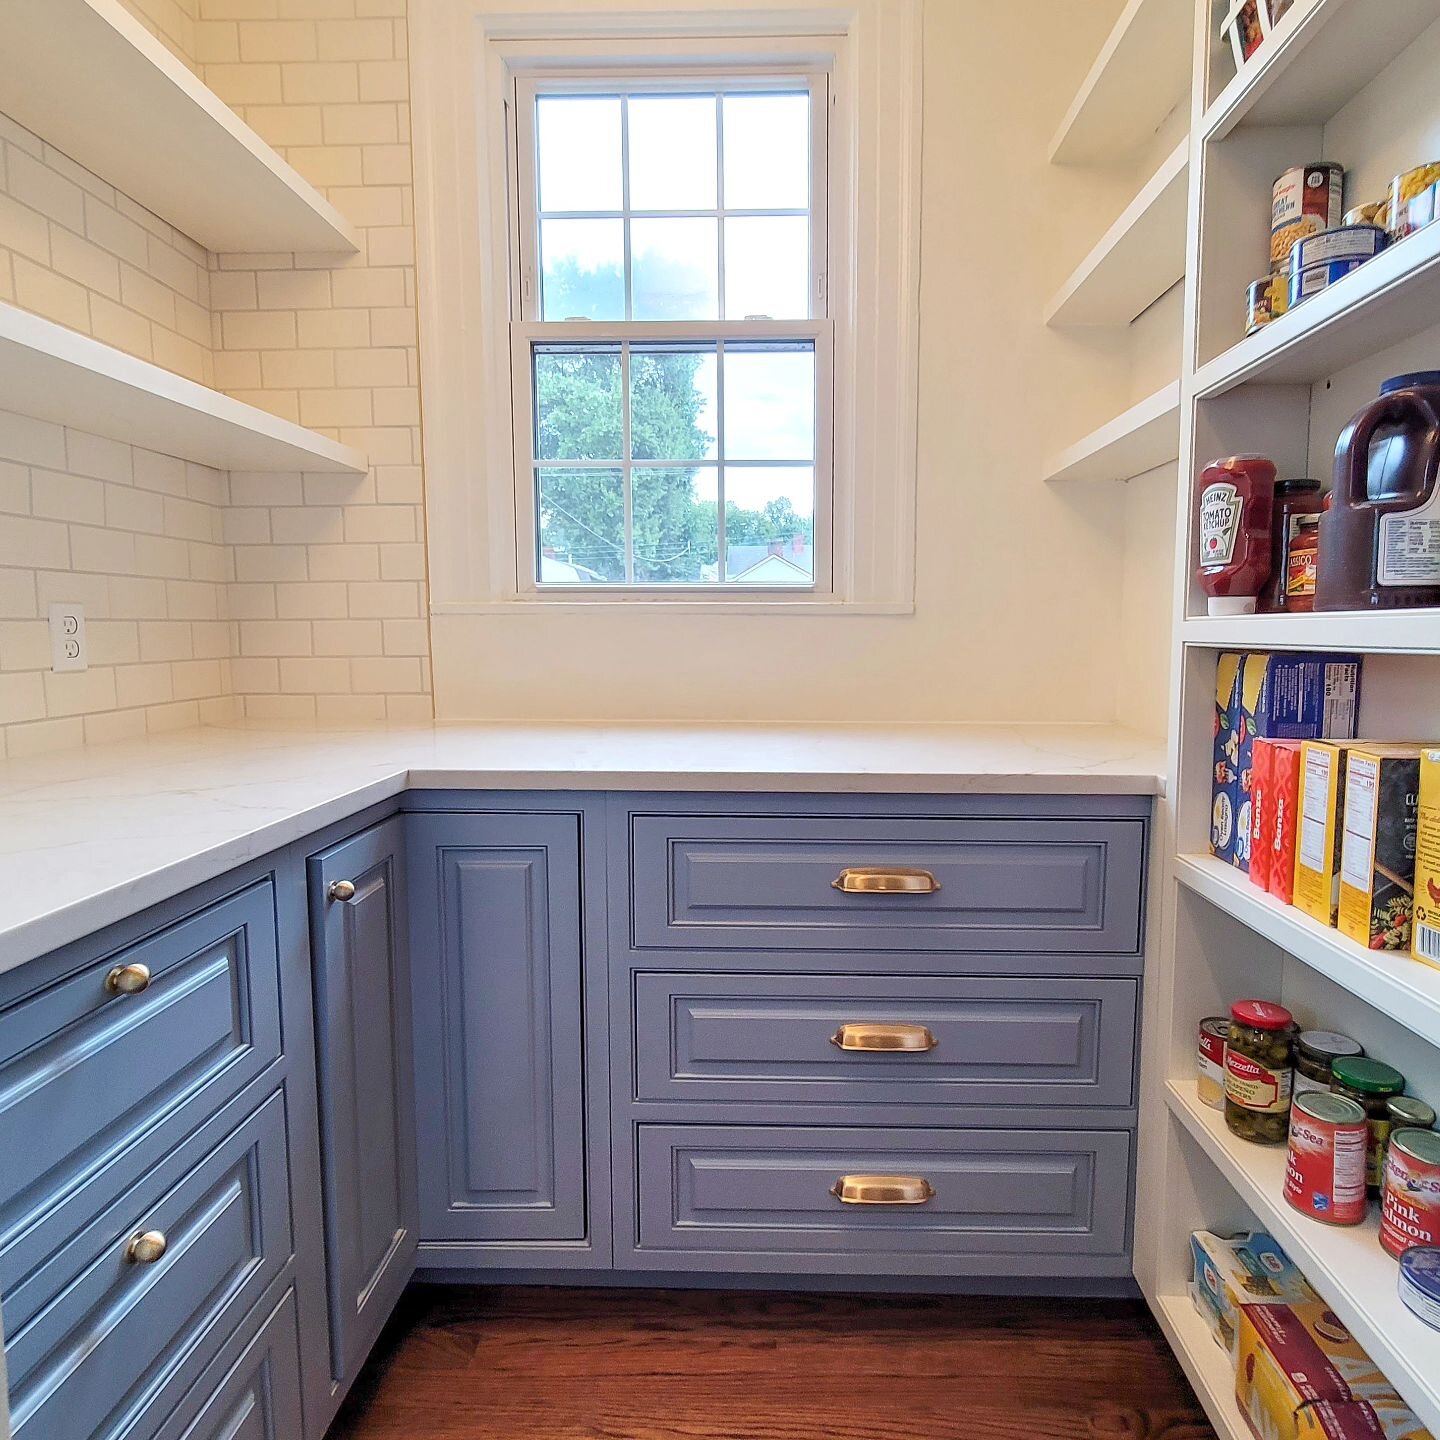 Our 3rd top 5 favorite projects of the year...our 1856 pantry! #pantrygoals

This one came with the usual complications found in any old historic home, but it is absolutely worth it. The charm and beauty of old historic homes are simply unparalleled.